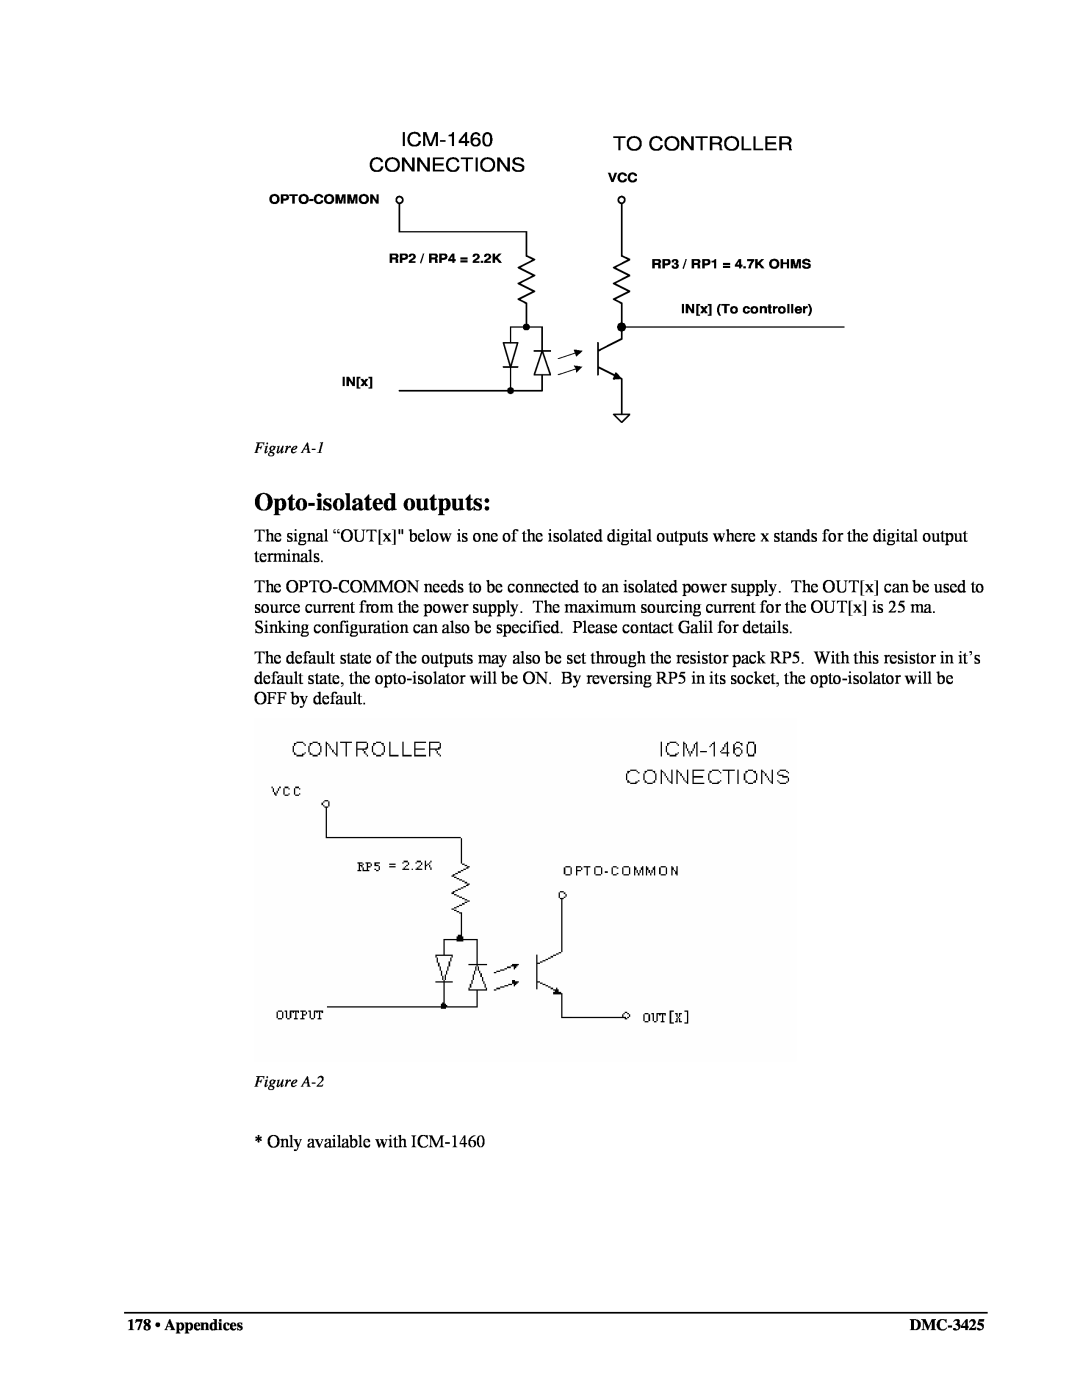 Galil DMC-3425 user manual Opto-isolatedoutputs, ICM-1460, To Controller, Connections 